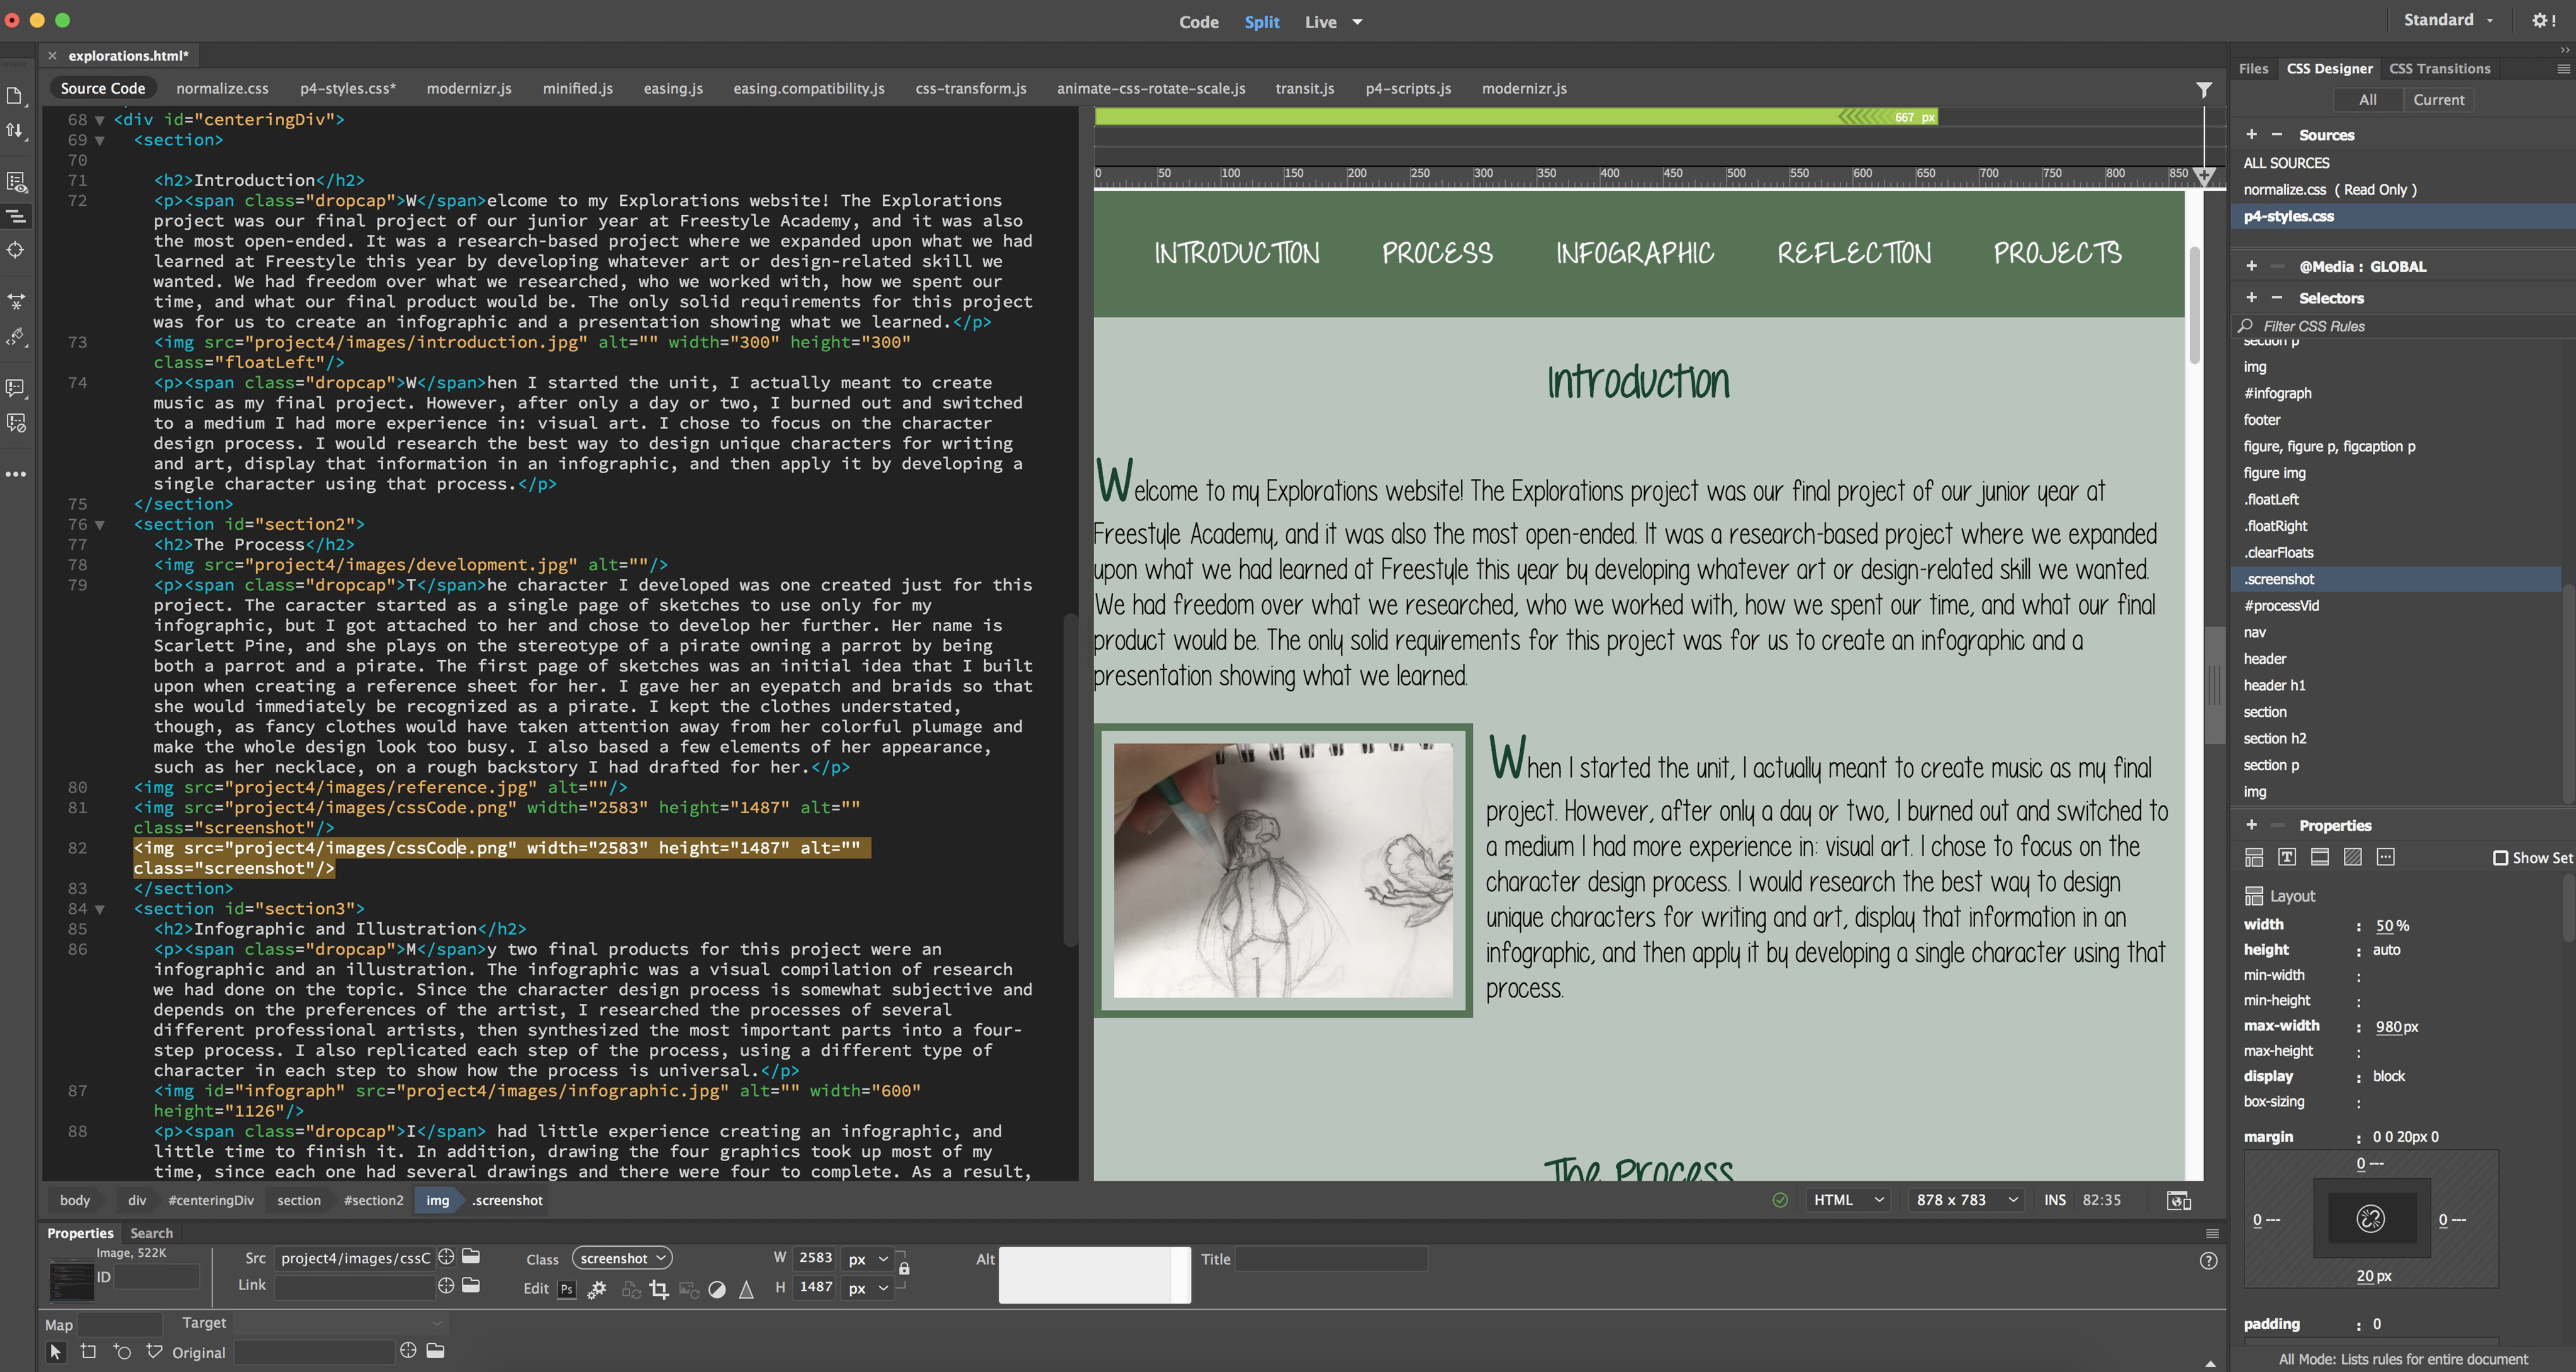 Screenshot of the Dreamweaver file for the Explorations website